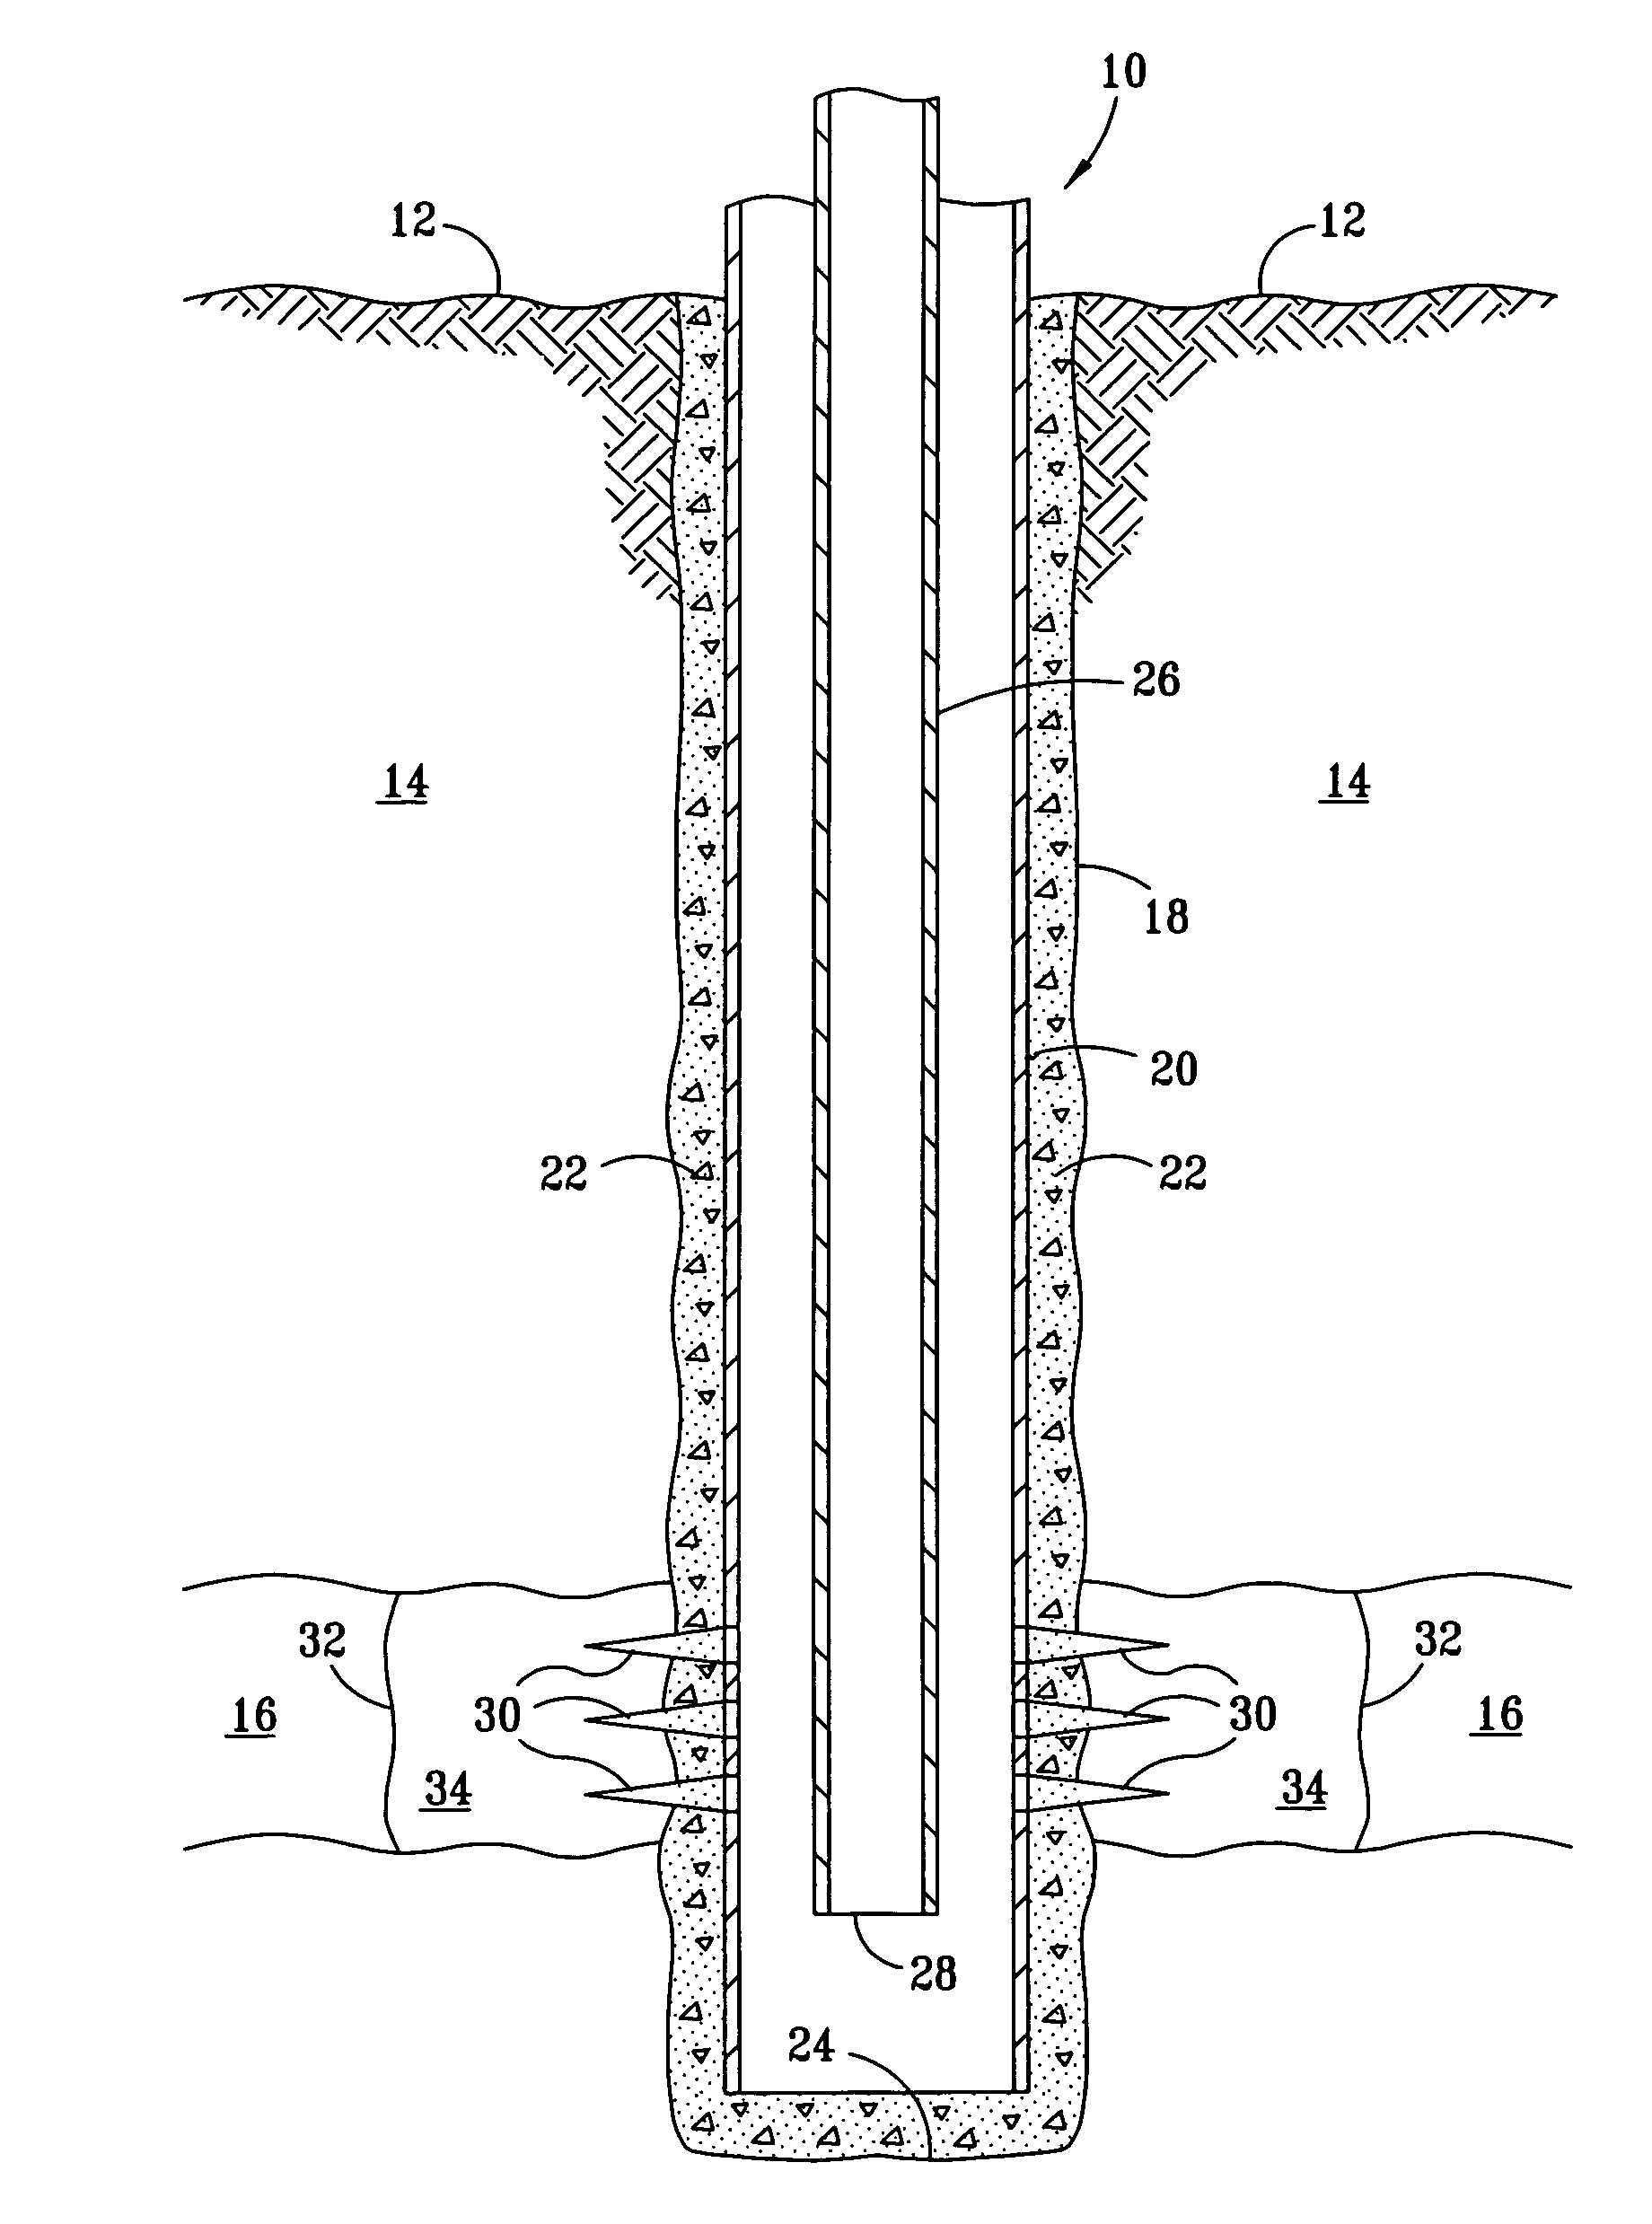 Method for removing iron deposits in a water system